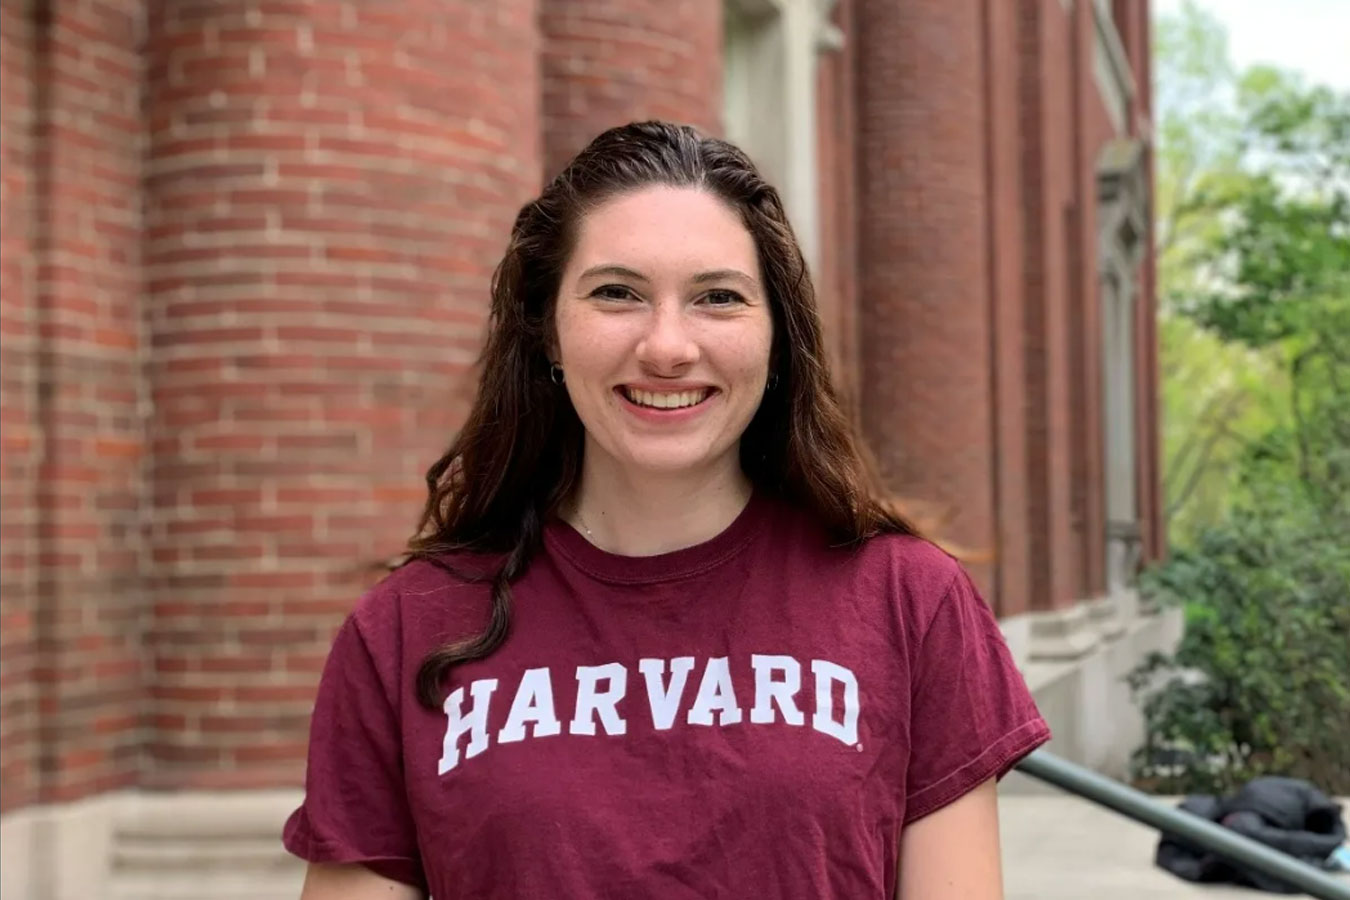 A young woman stands in front of a brick building while wearing a Harvard sweatshirt